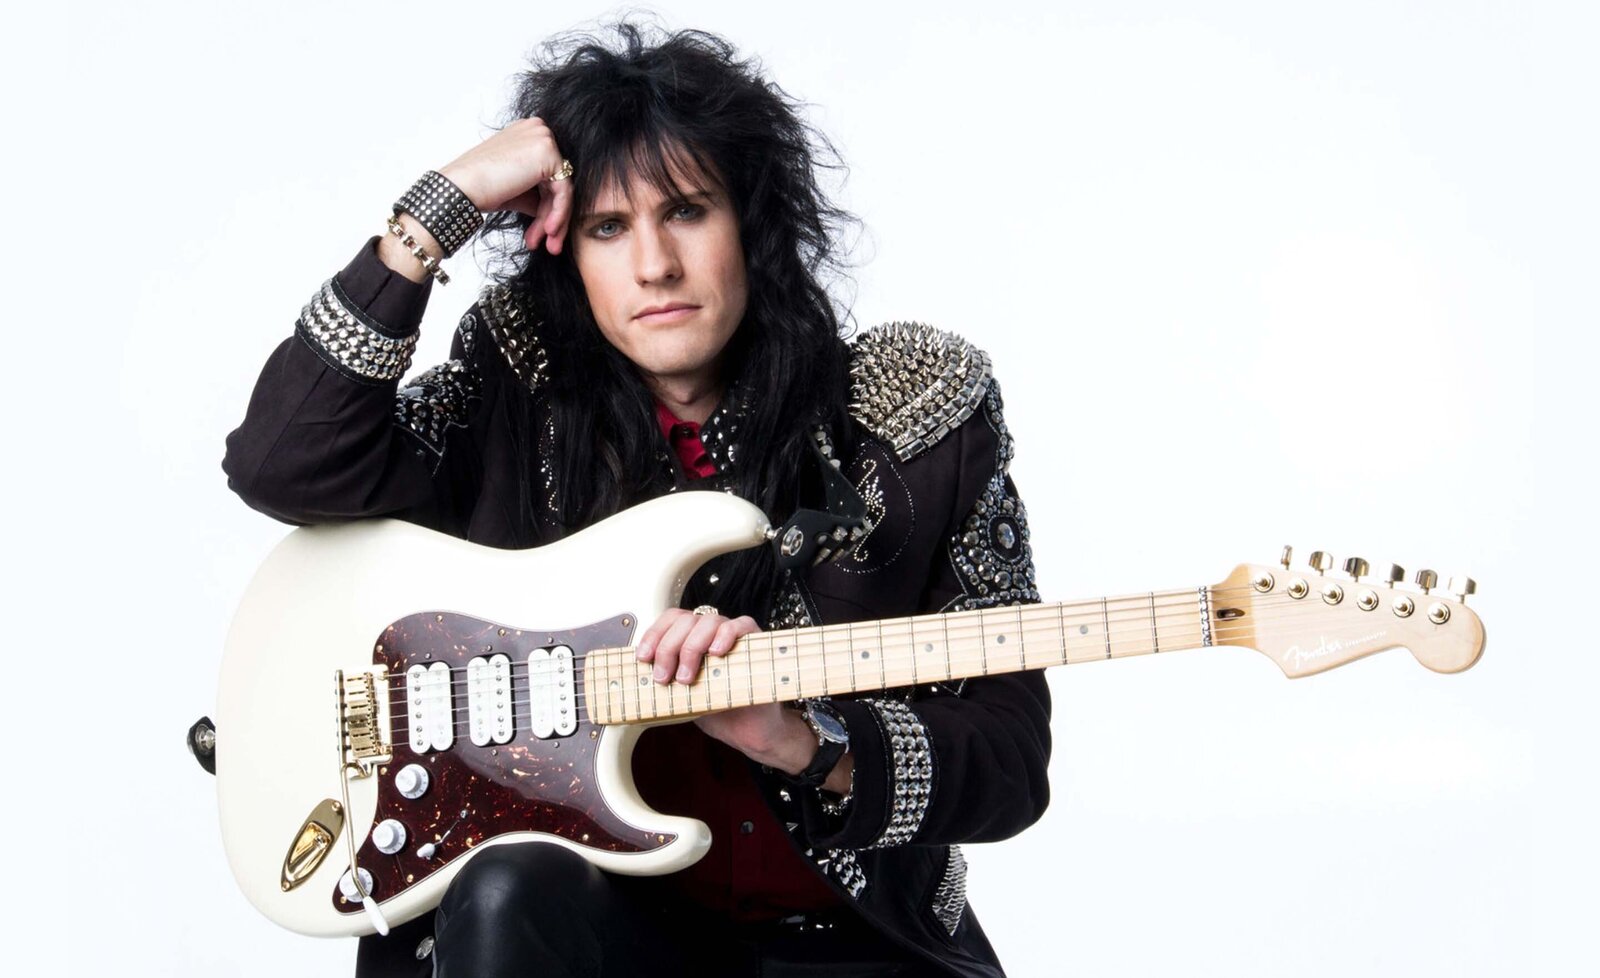 Music portrait Rocky Kramer sitting with white electric guitar against white backdrop wearing black leather jacket